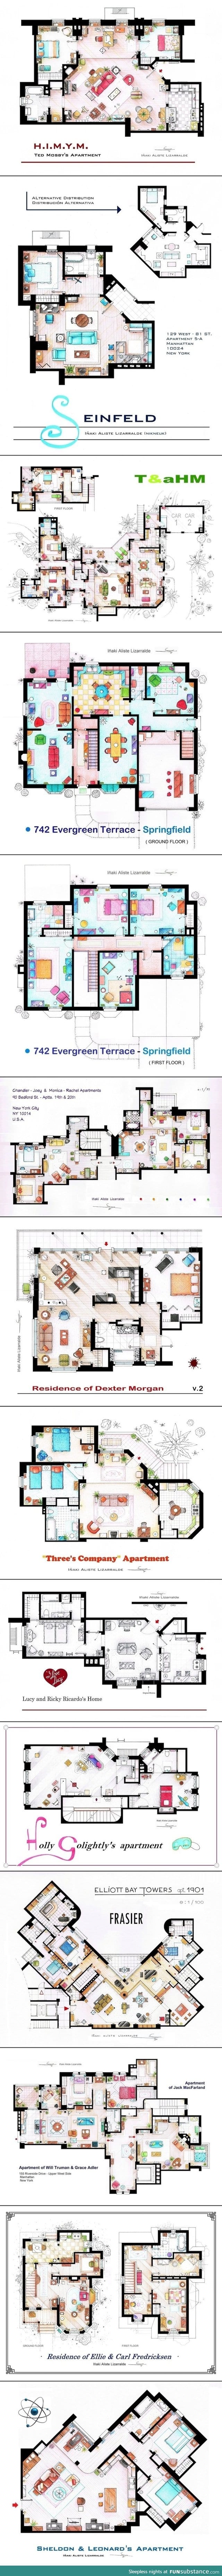 Famous Movie and TV Show Home Floorplans